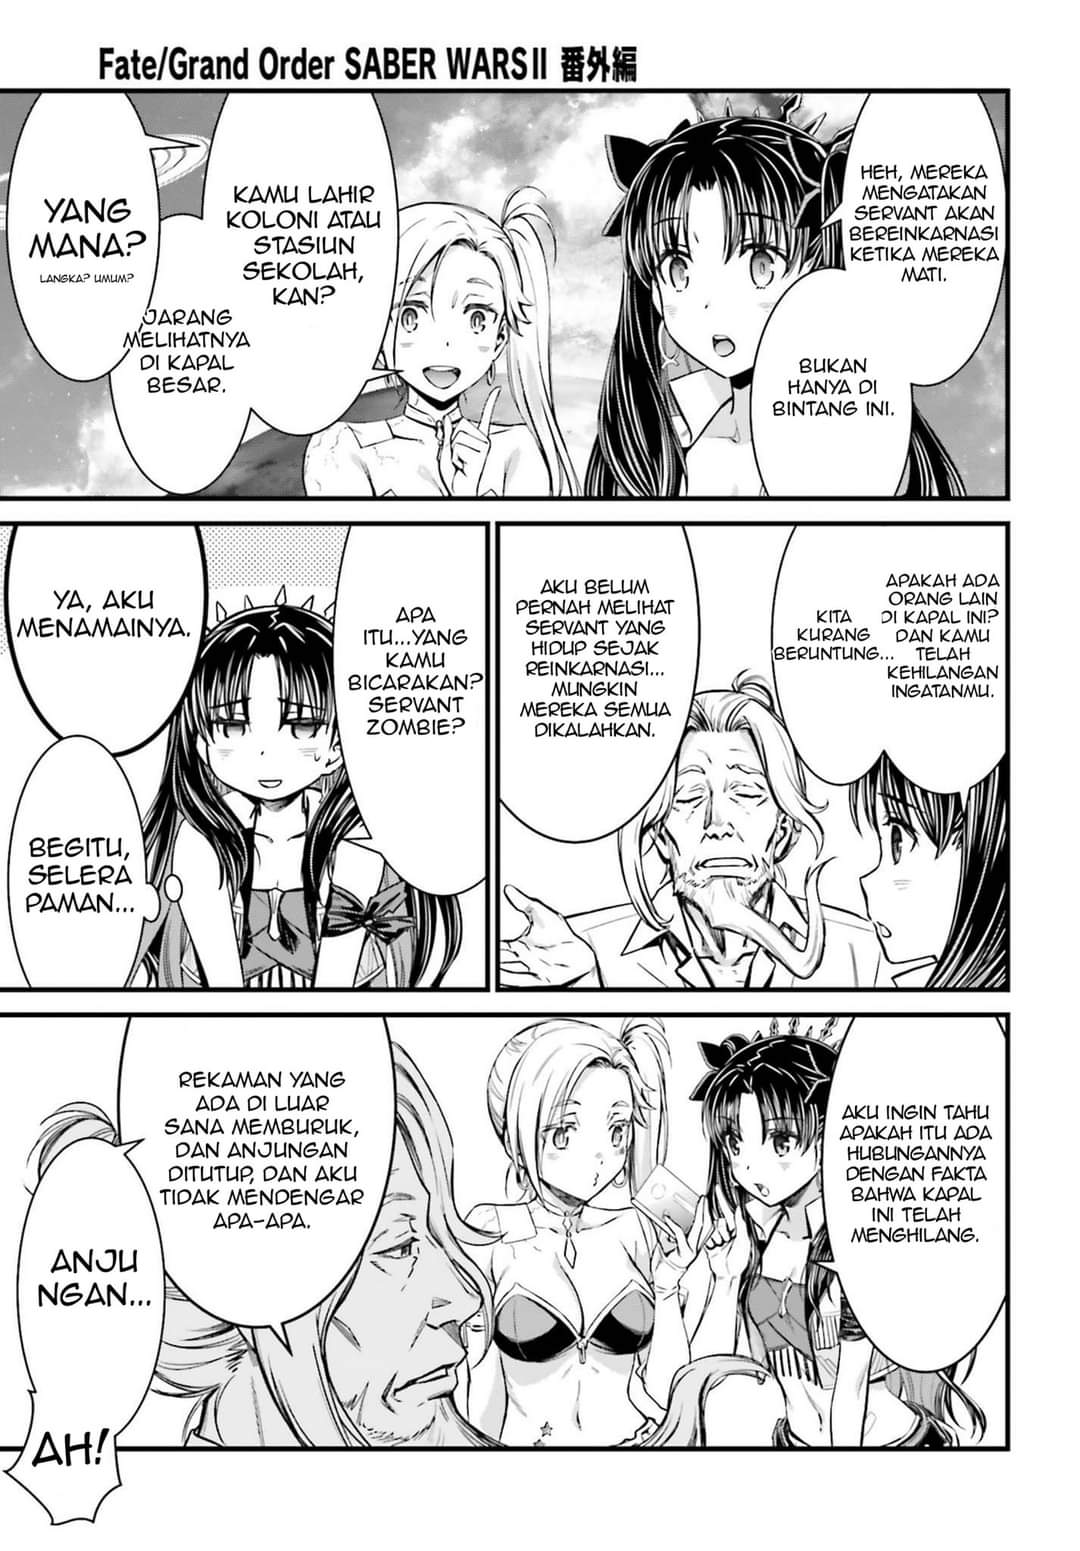 Fate/Grand Order SABER WARS II Extra Edition: Jane & Ishtar ~ Shooting Star of 1 Million Light Years ~ Chapter 1 bahasa Indonesia Gambar 44